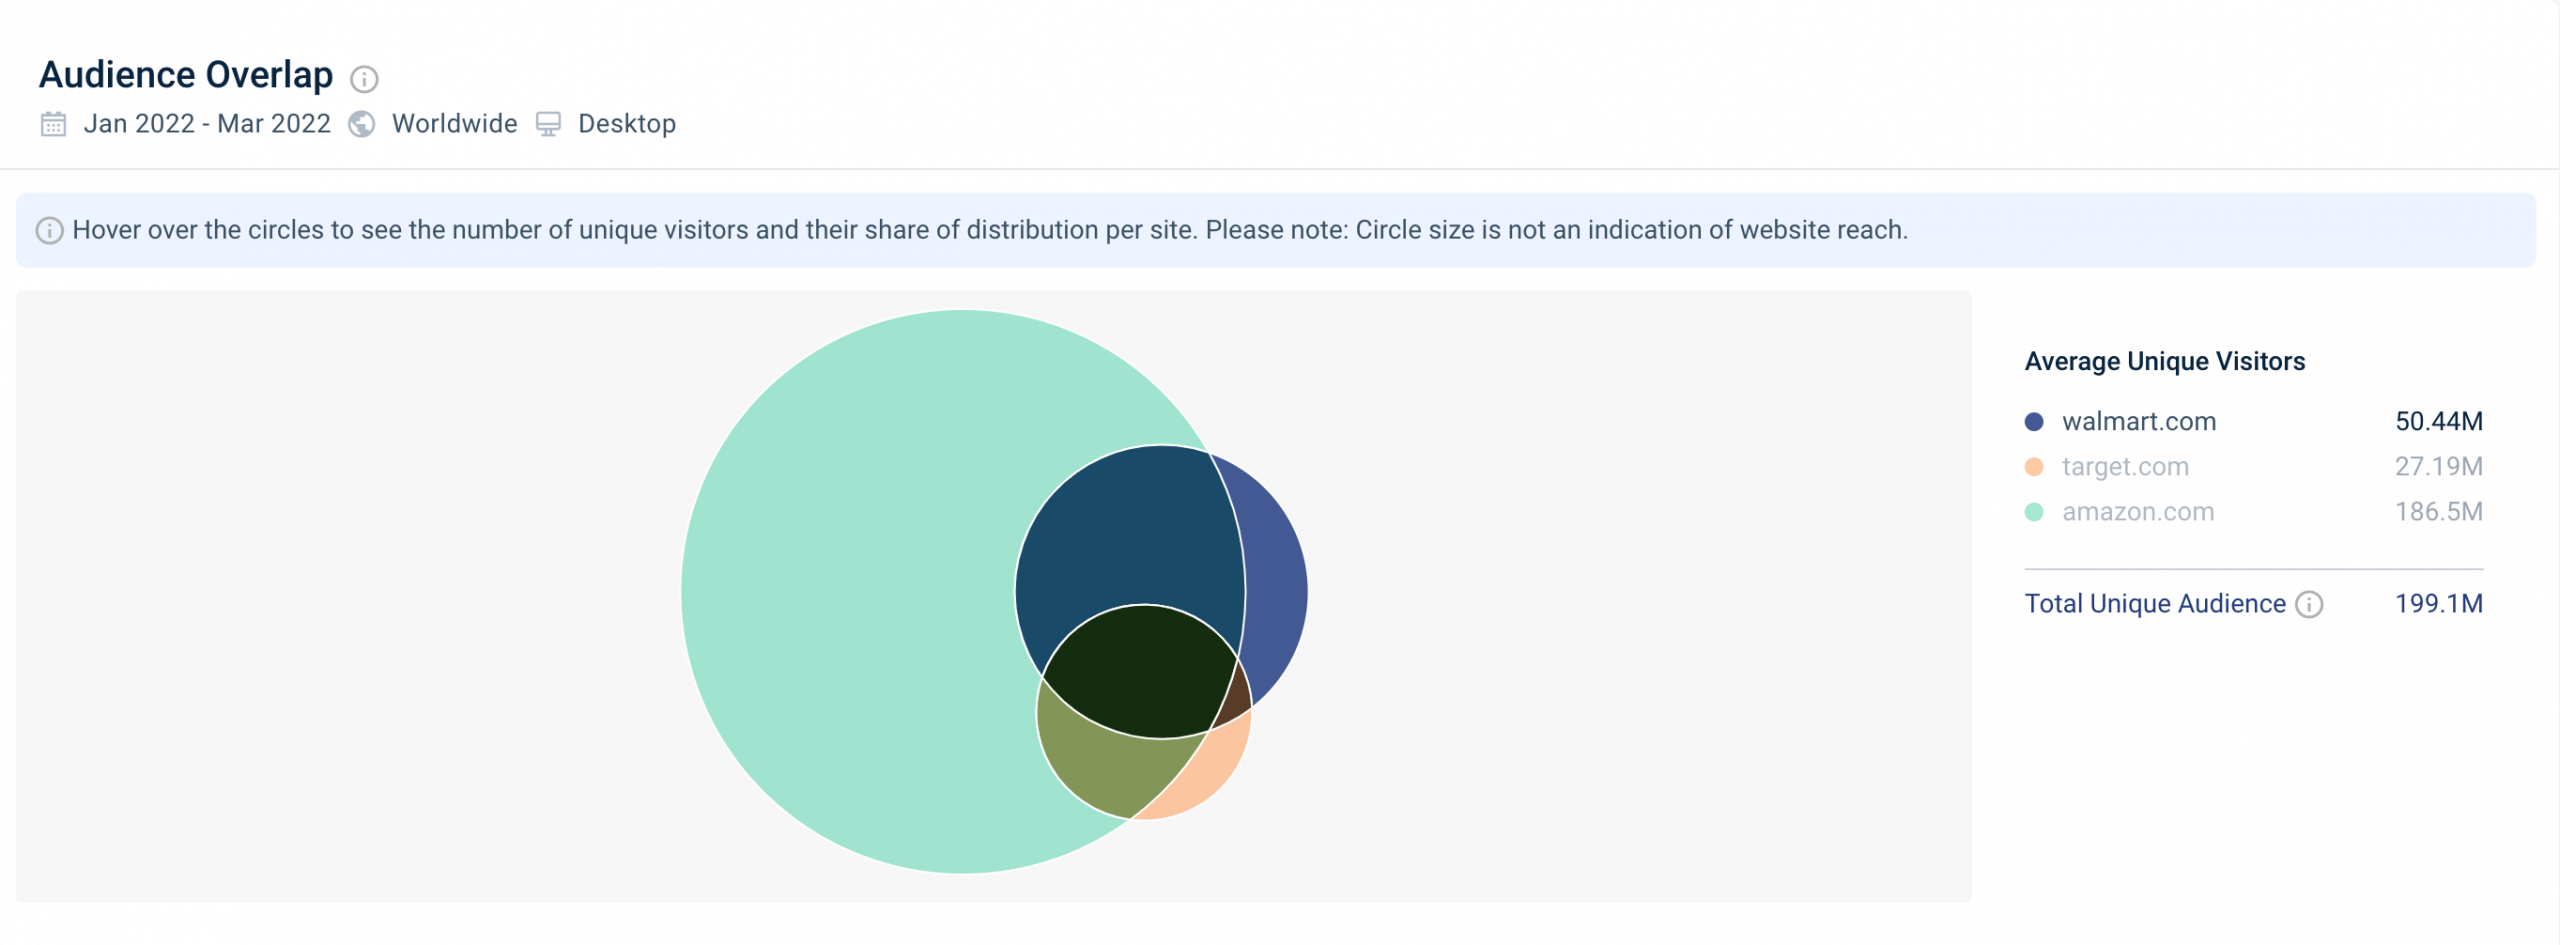 Similarweb Audience Insights shows audience overlap.